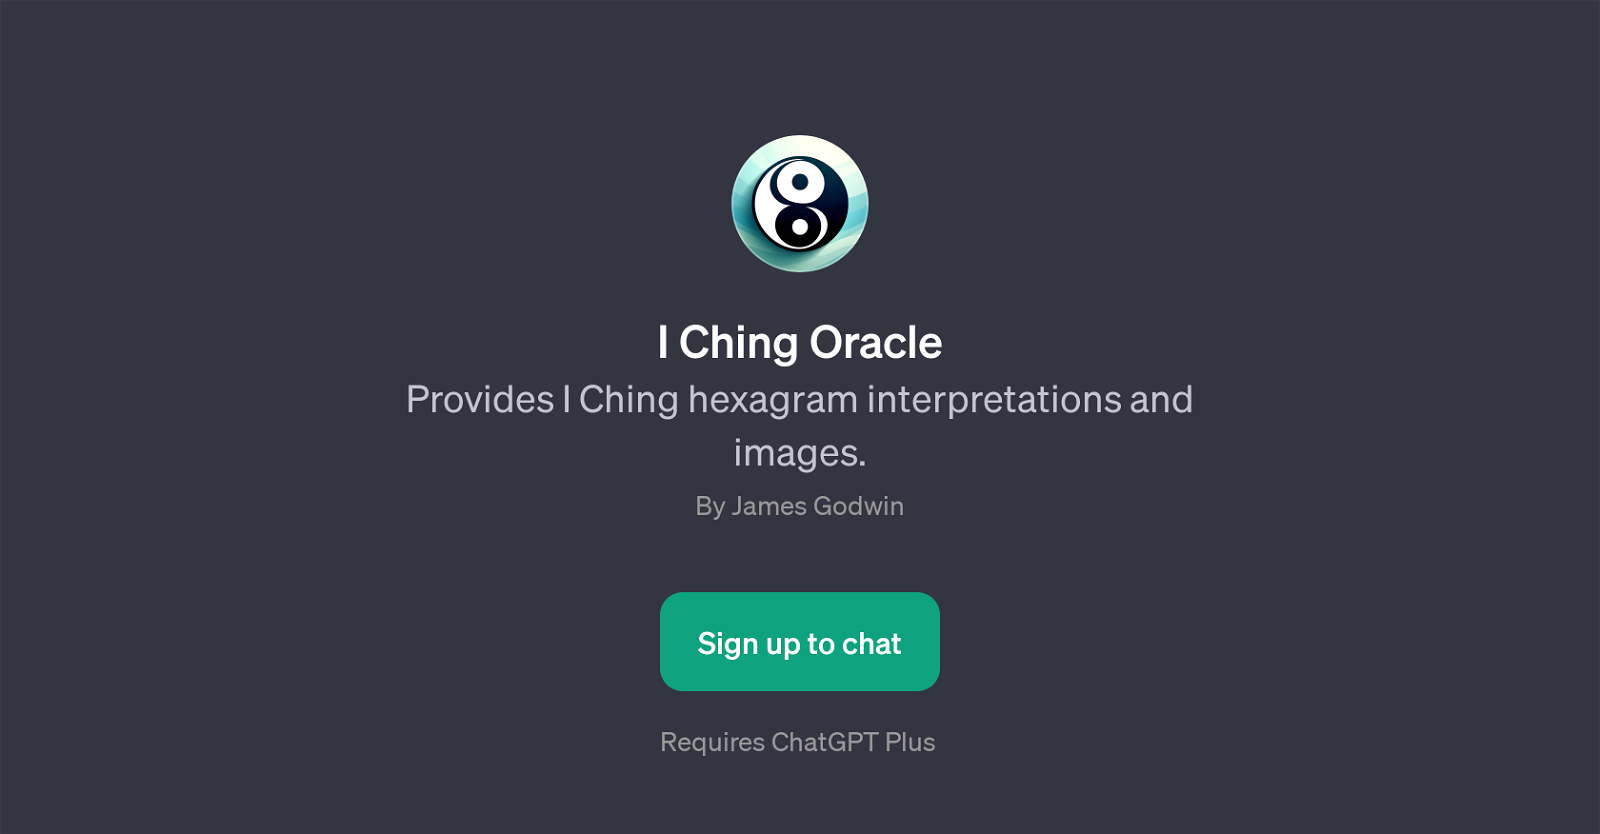 I Ching Oracle website